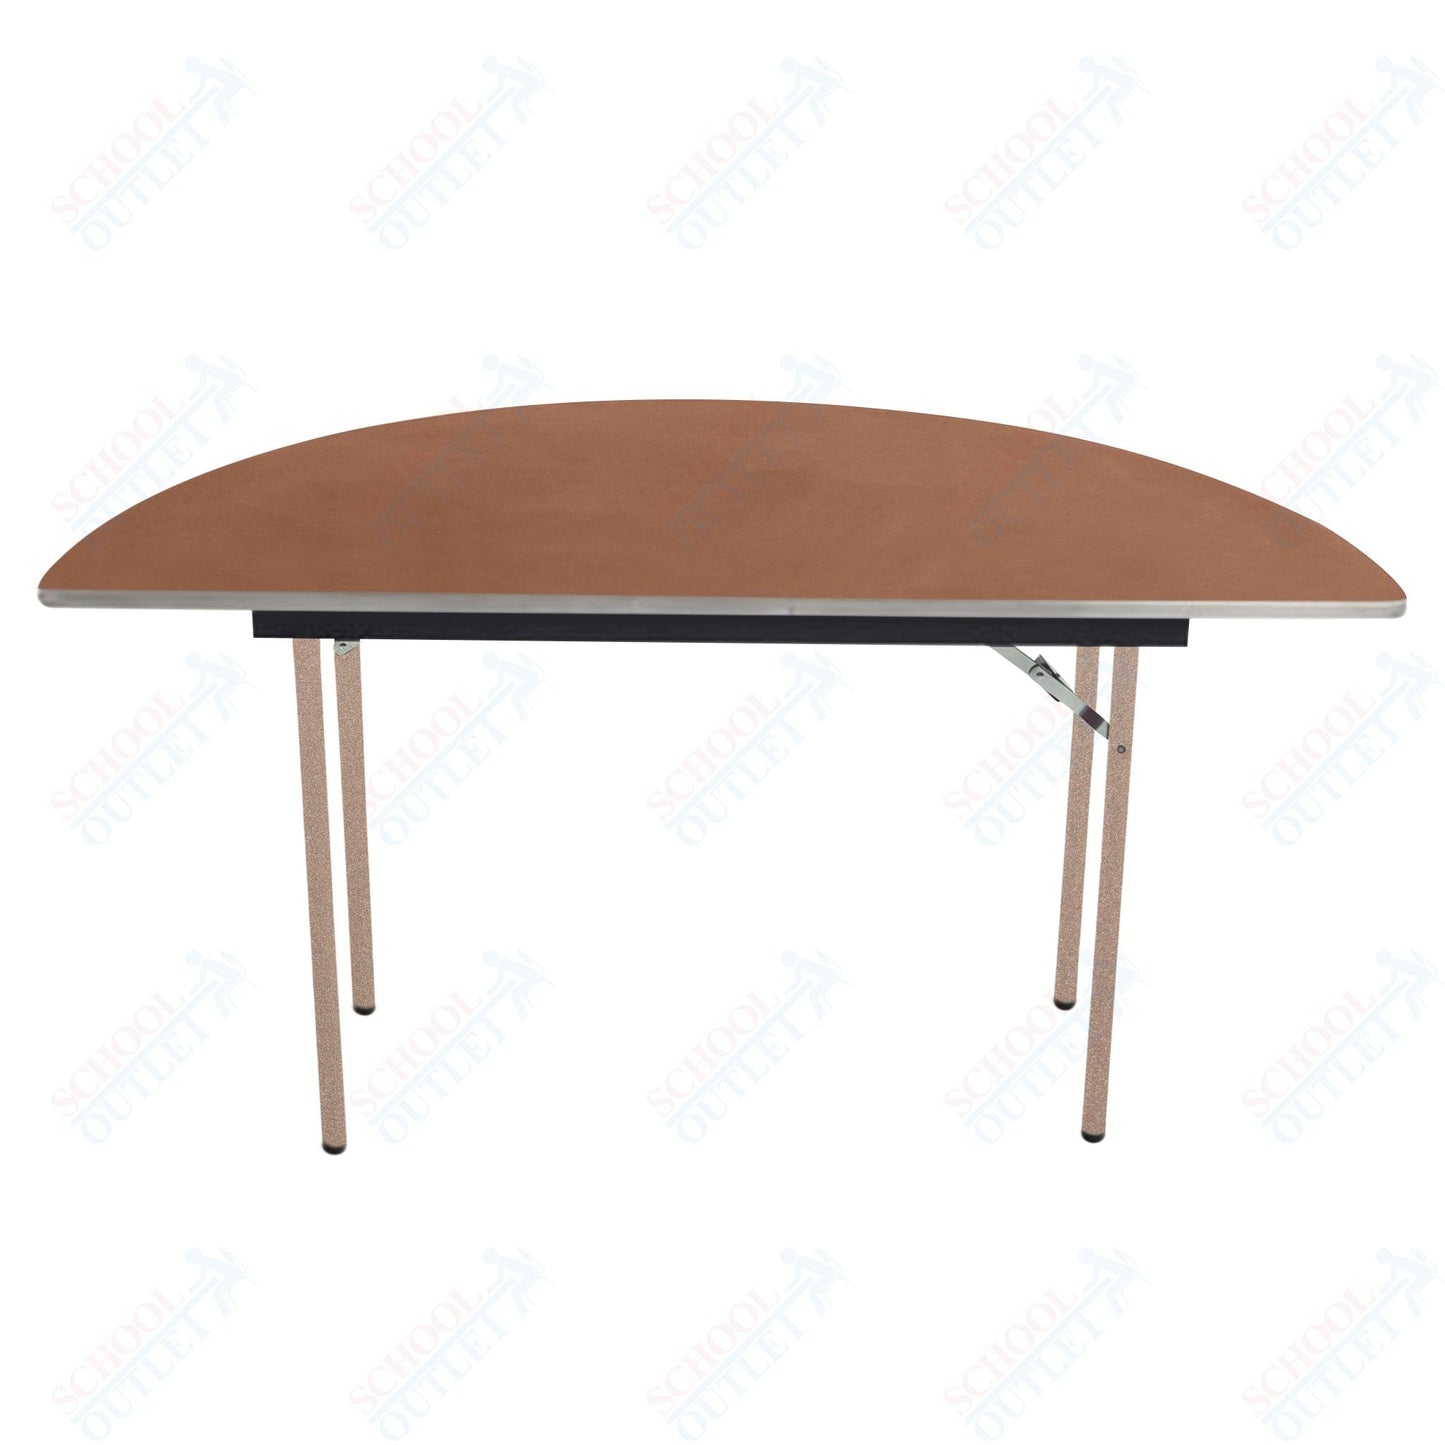 AmTab Folding Table - Plywood Stained and Sealed - Aluminum Edge - Half Round - Half 30" Diameter x 29"H (AmTab AMT - HR30PA) - SchoolOutlet